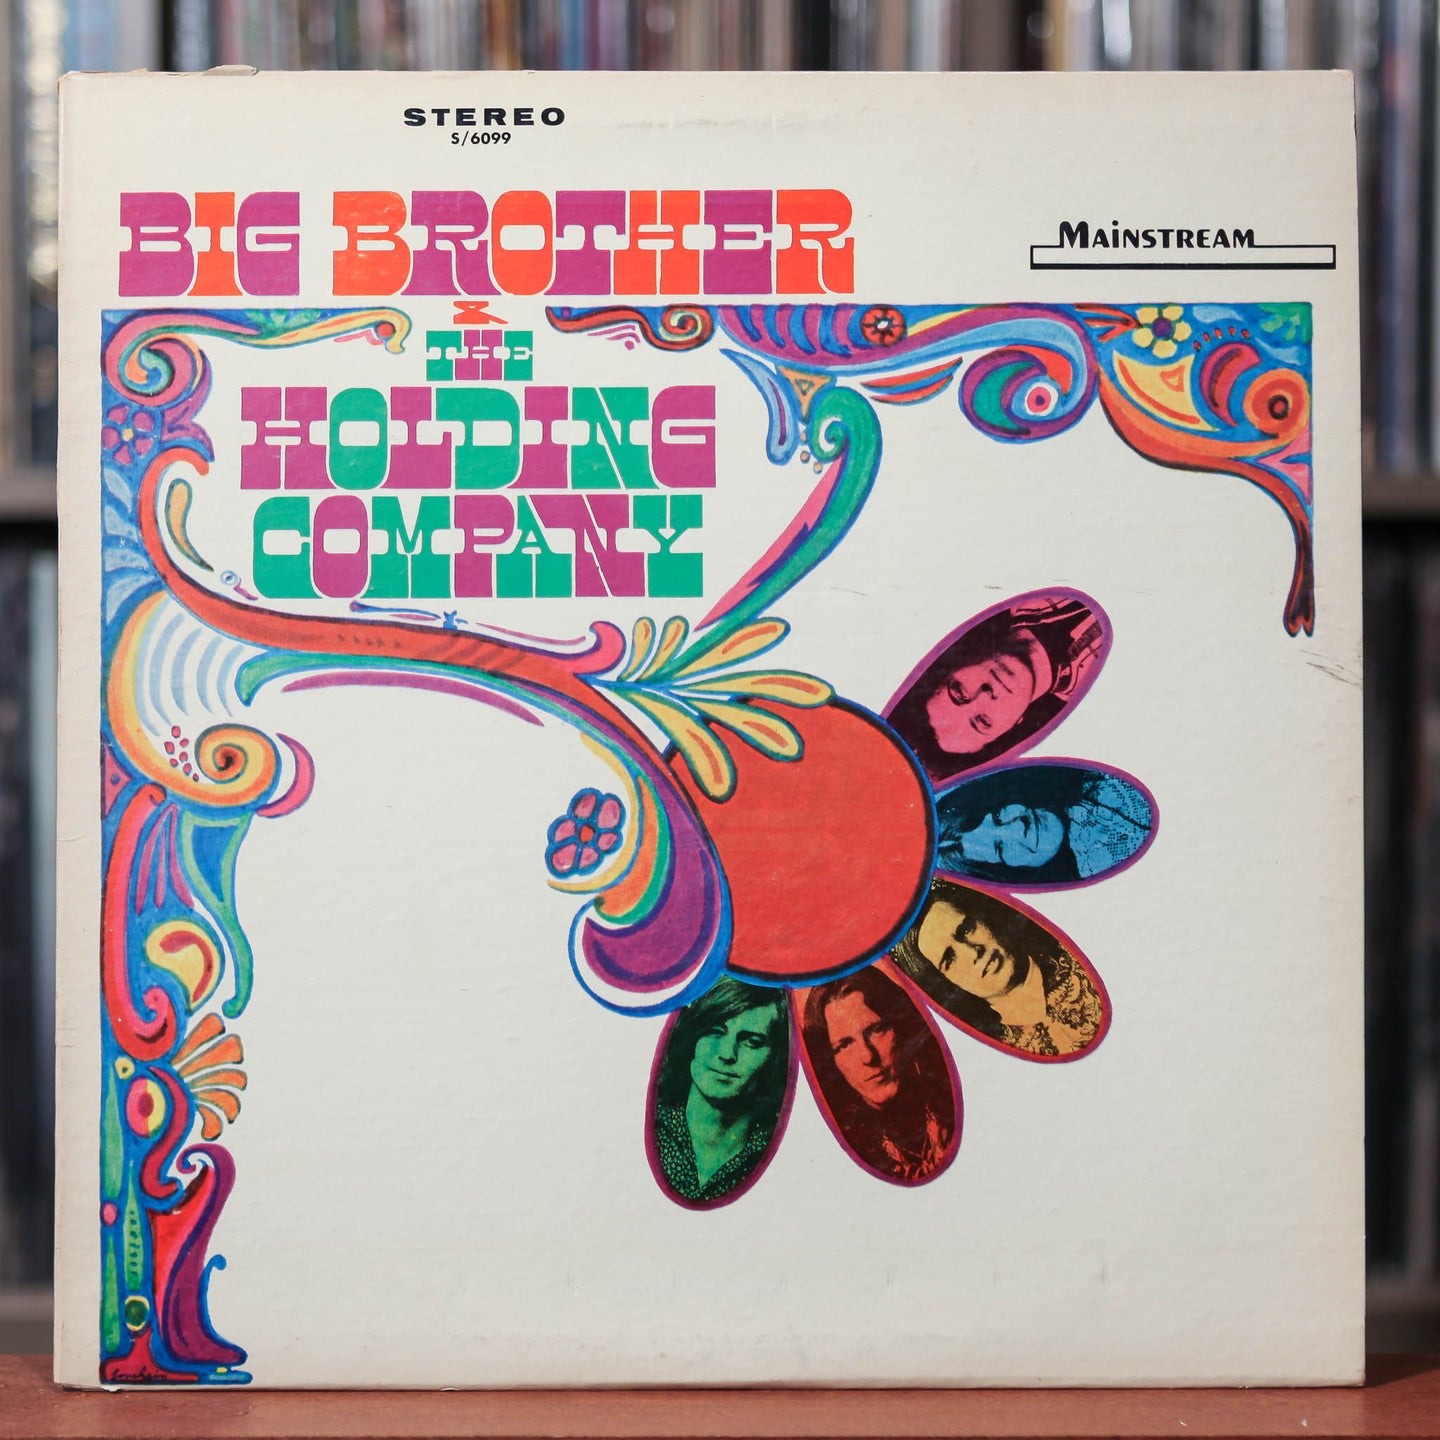 Big Brother and the Holding Company - Self Titled - 1967 Mainstream Records, VG+/VG+